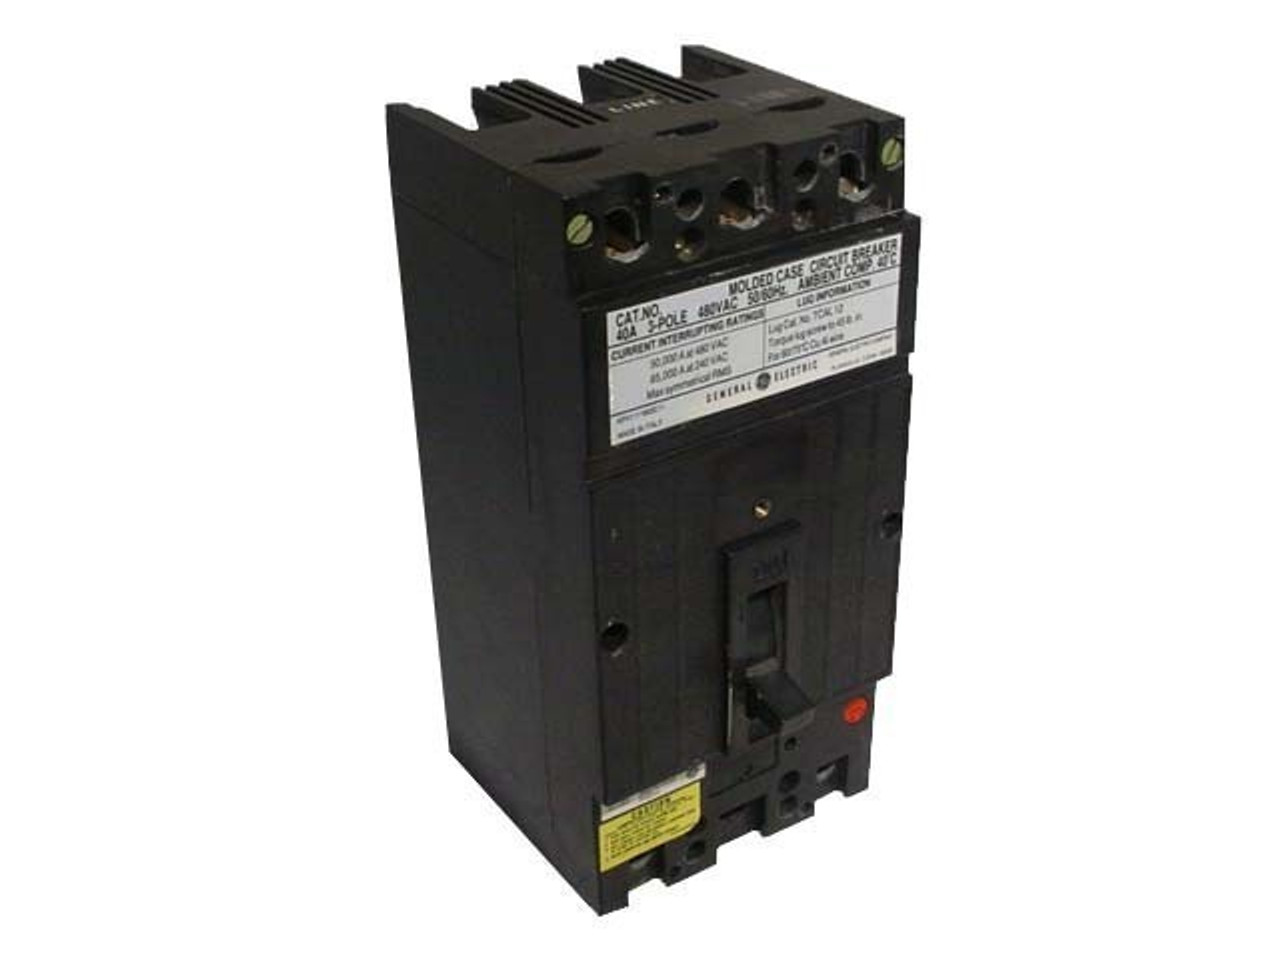 GE TLB134015 U 3P 15A 600V 50AIC USED 50/60Hz Molded Case Breaker